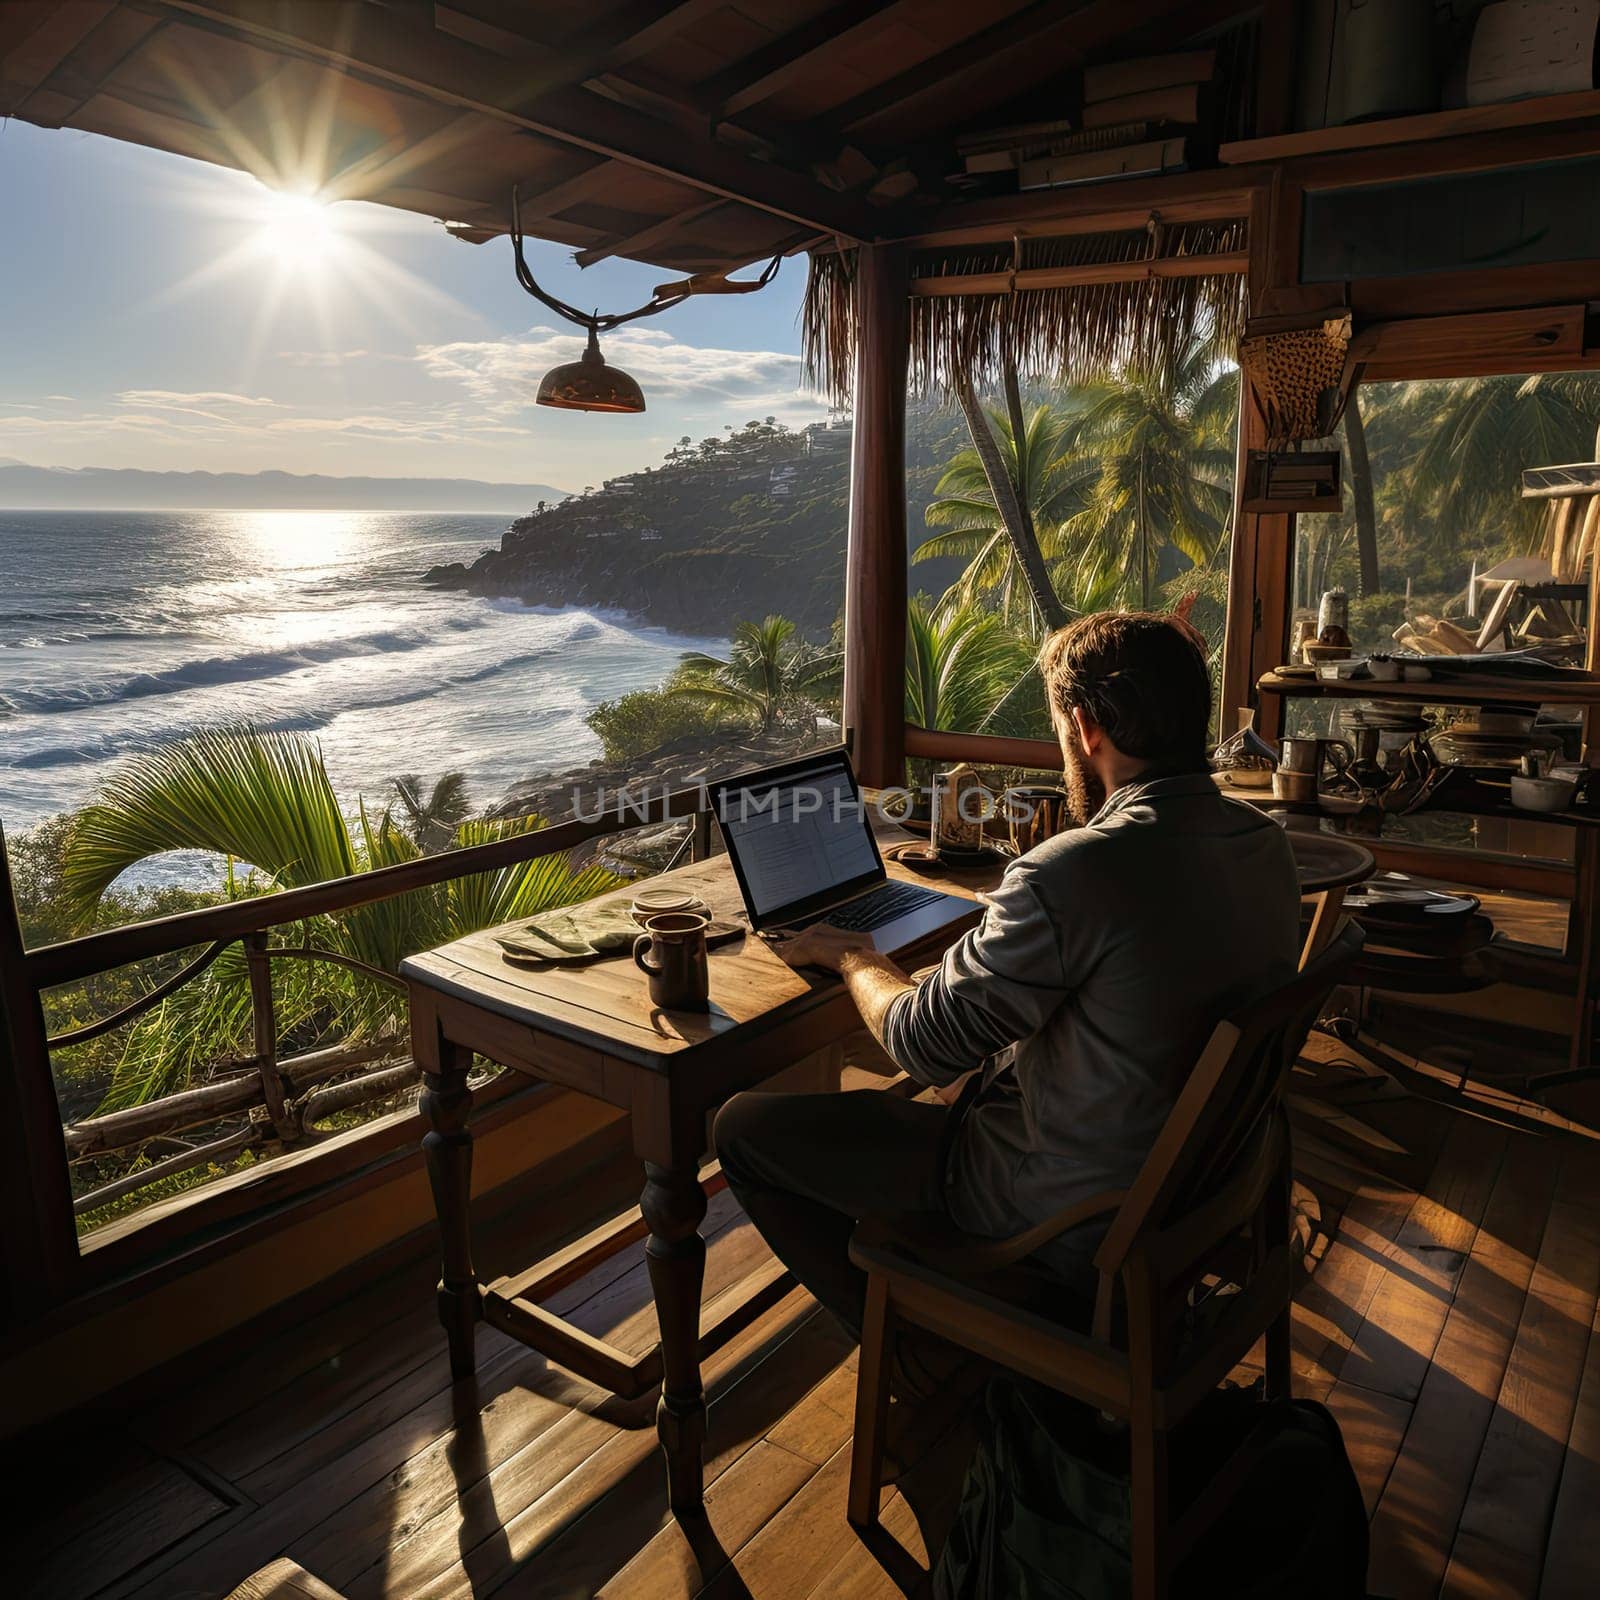 Nomad guy working on his online business remotely from an idyllic workplace in the sea coast.